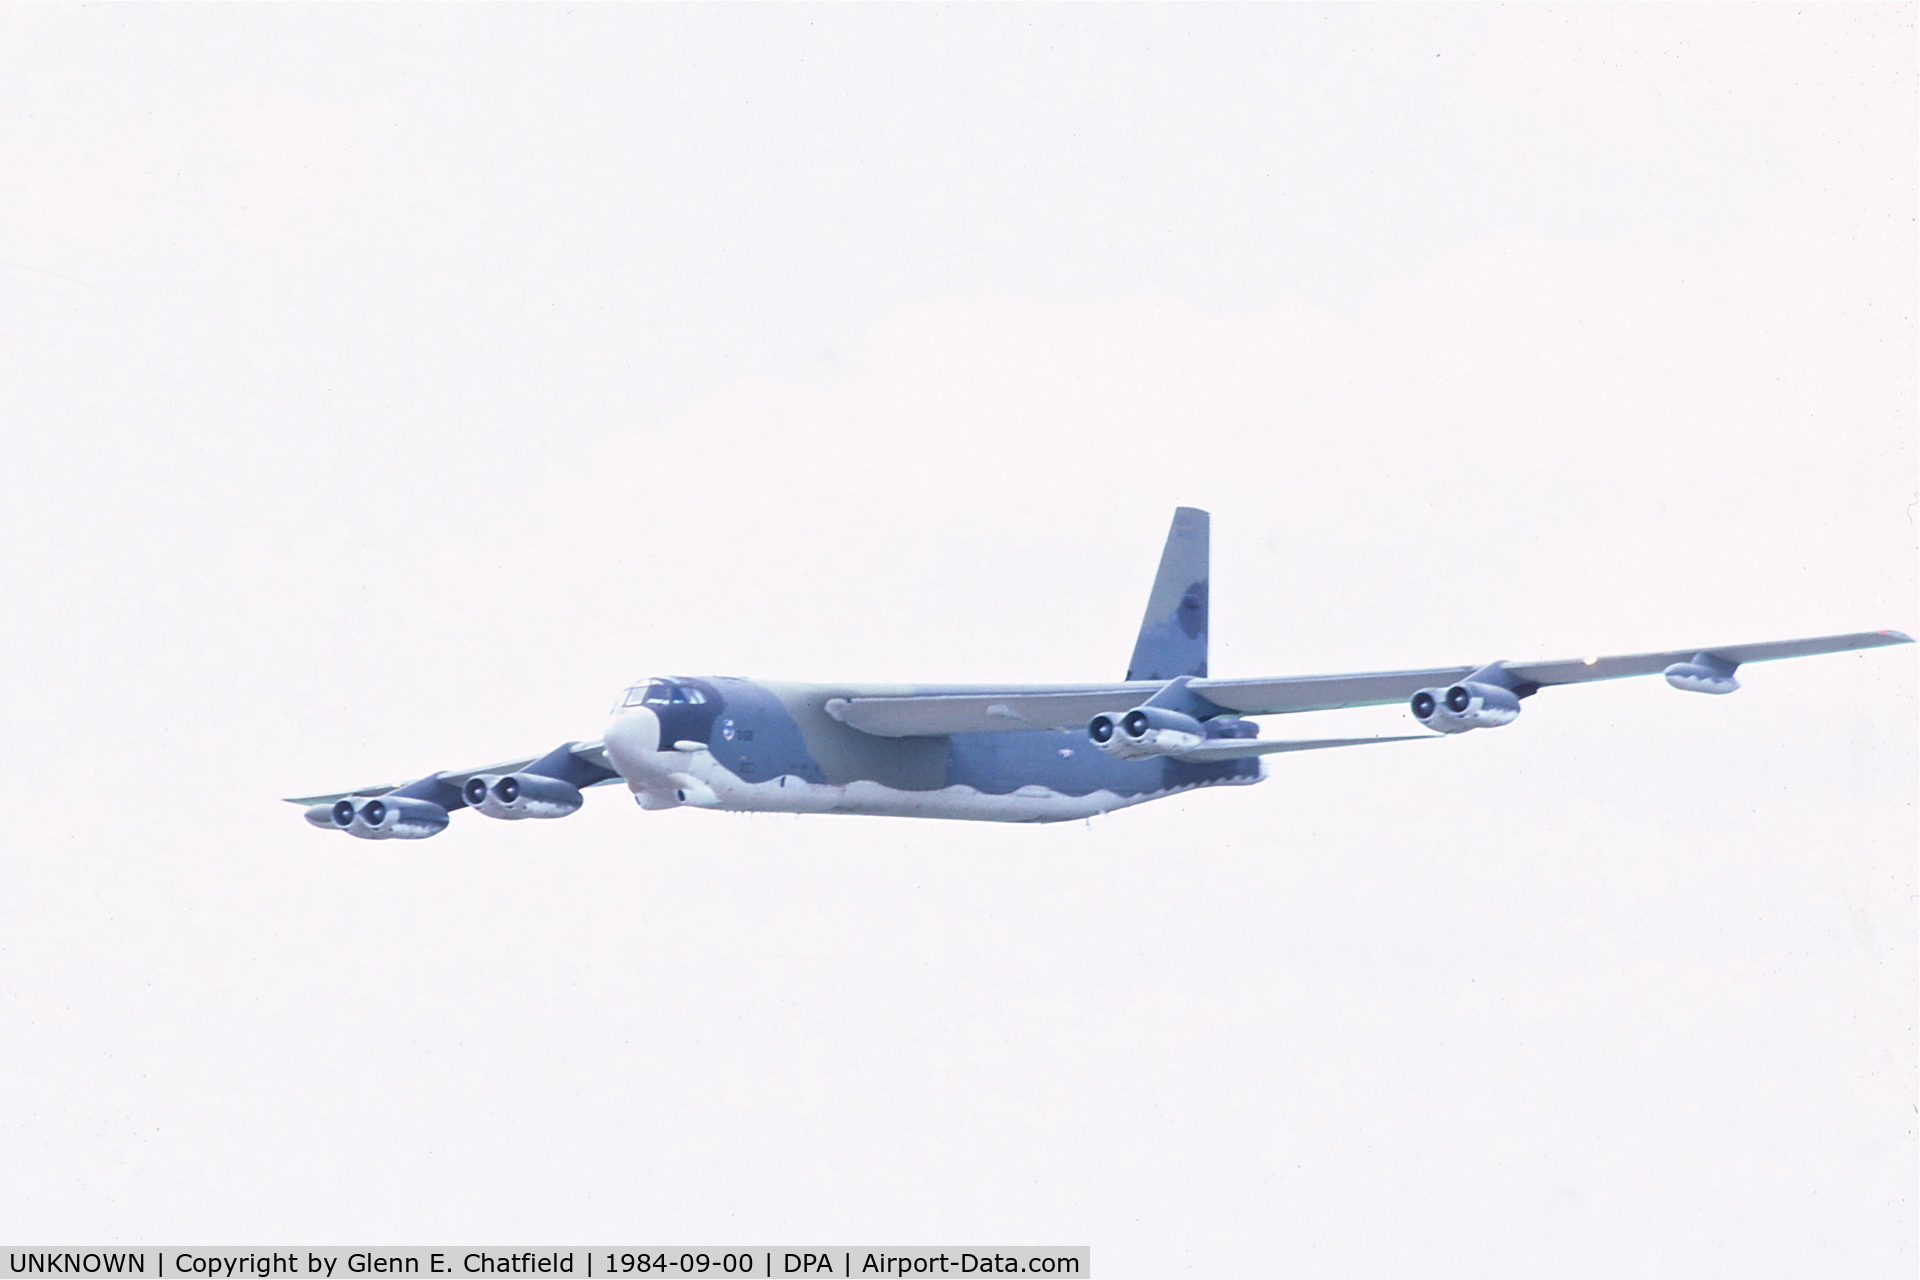 UNKNOWN, Boeing B-52G Stratofortress C/N Unknown, B-52G approaching RY 4 for low approach past the control tower